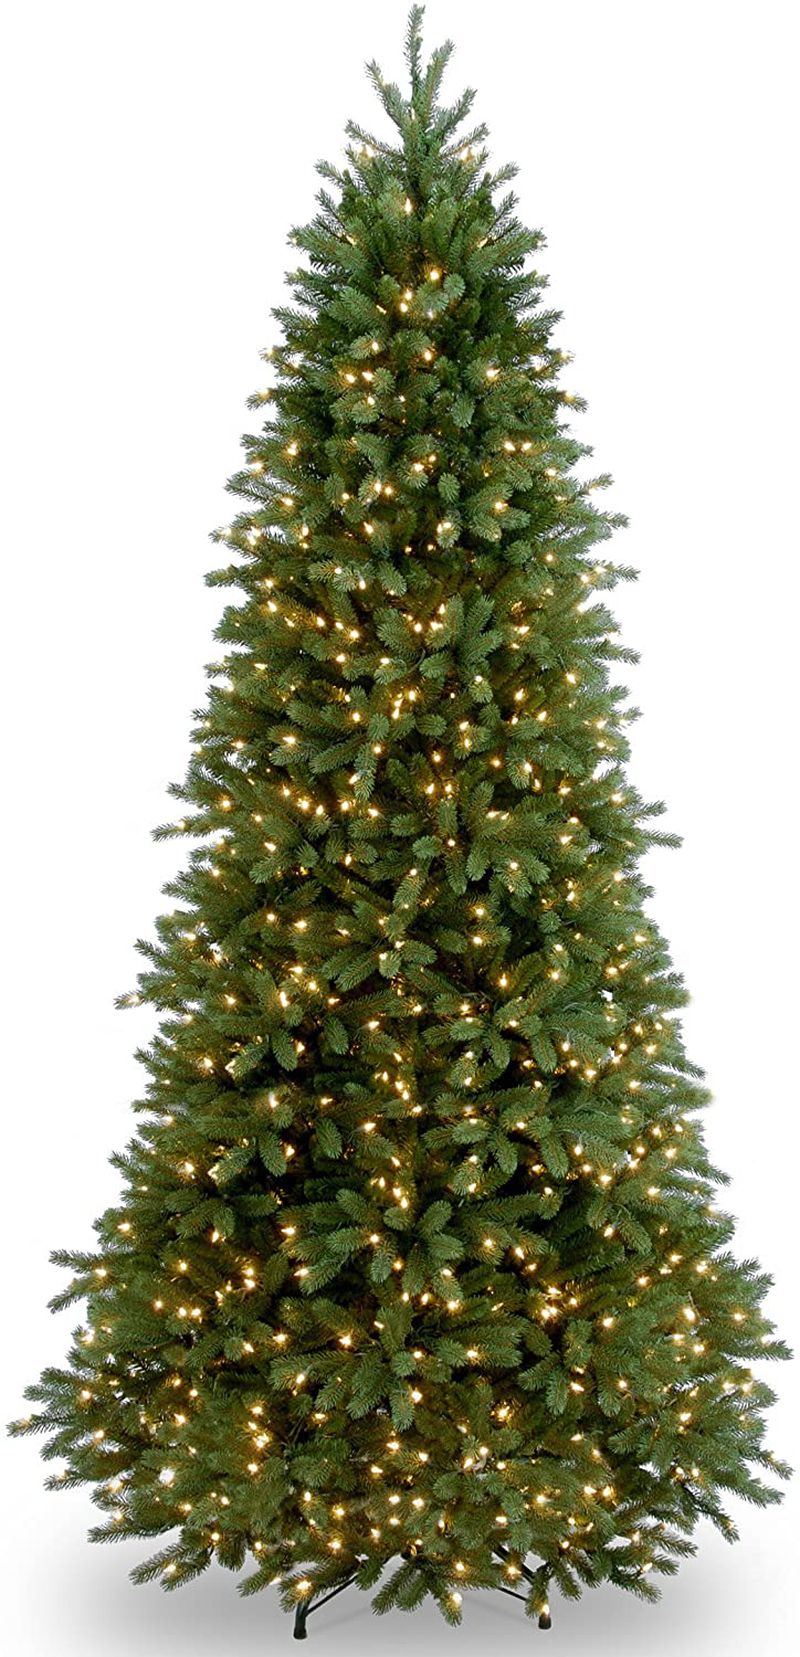 National Tree Company 'Feel Real' Pre-lit Artificial Christmas Tree | Includes Pre-strung White Lights and Stand | Jersey Frasier Fir Slim - 9 ft